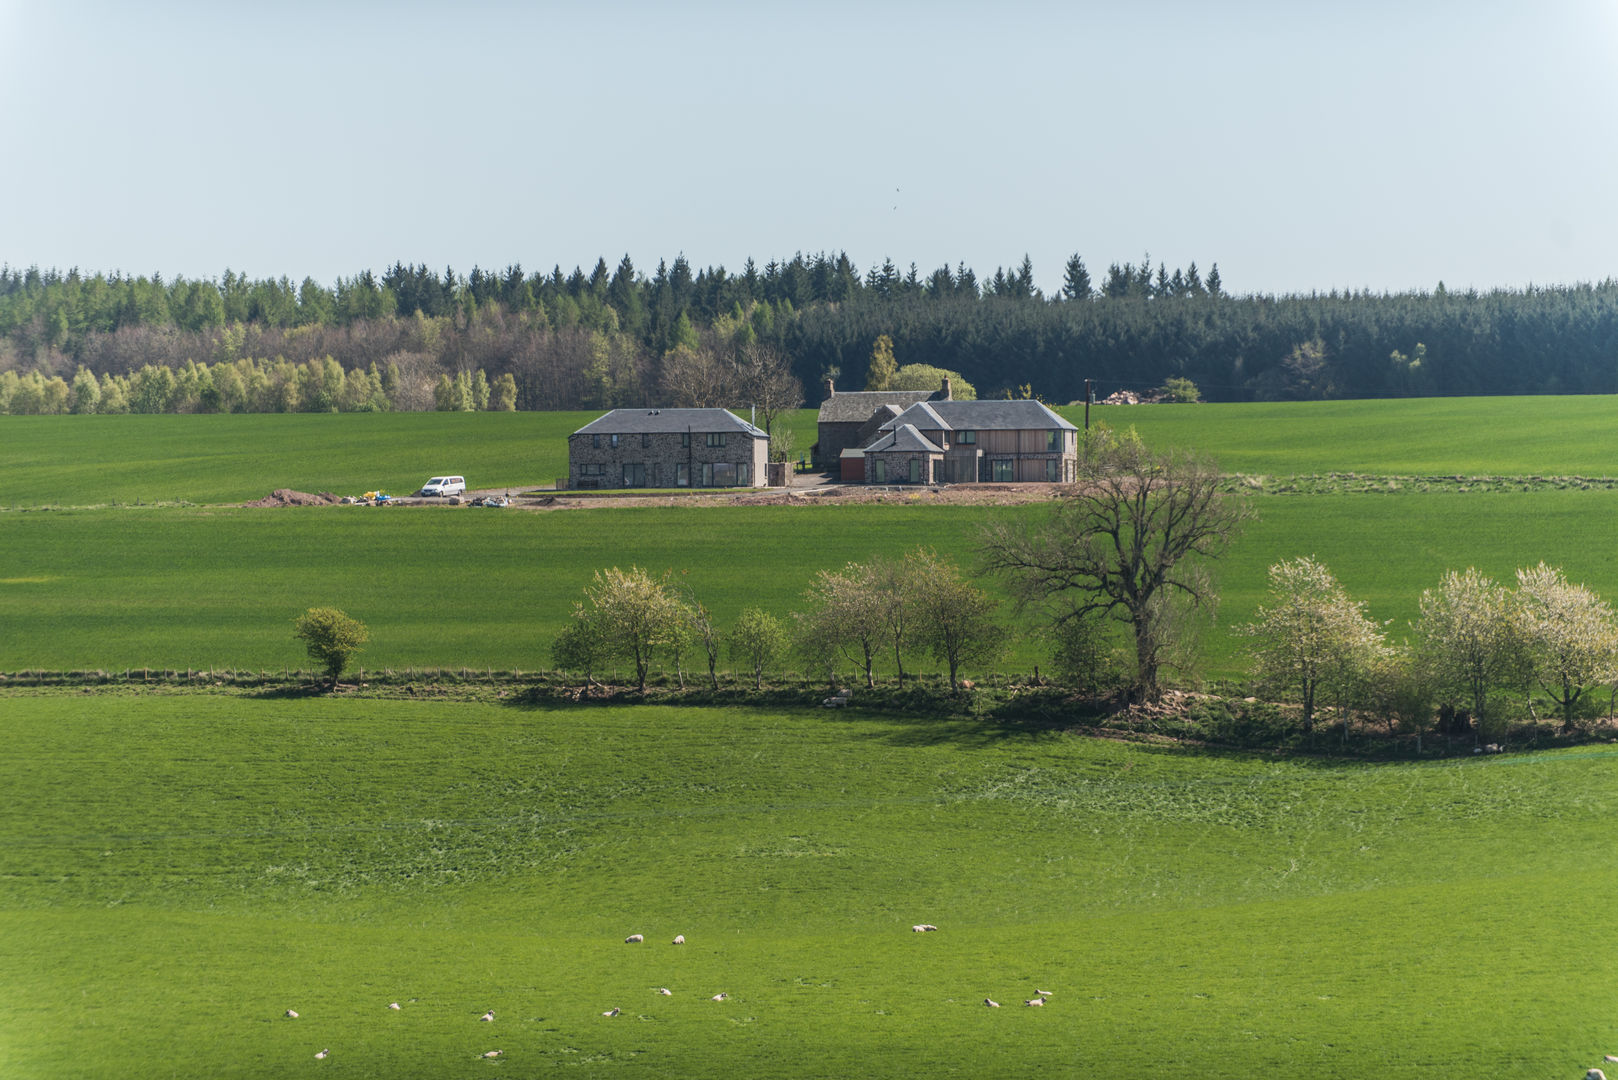 The development sits within the landscape as the former farm steading would Woodside Parker Kirk Architects Country style house rural,architecture,farm steading,development,new build,new house,stone house,landscape,countryside,view